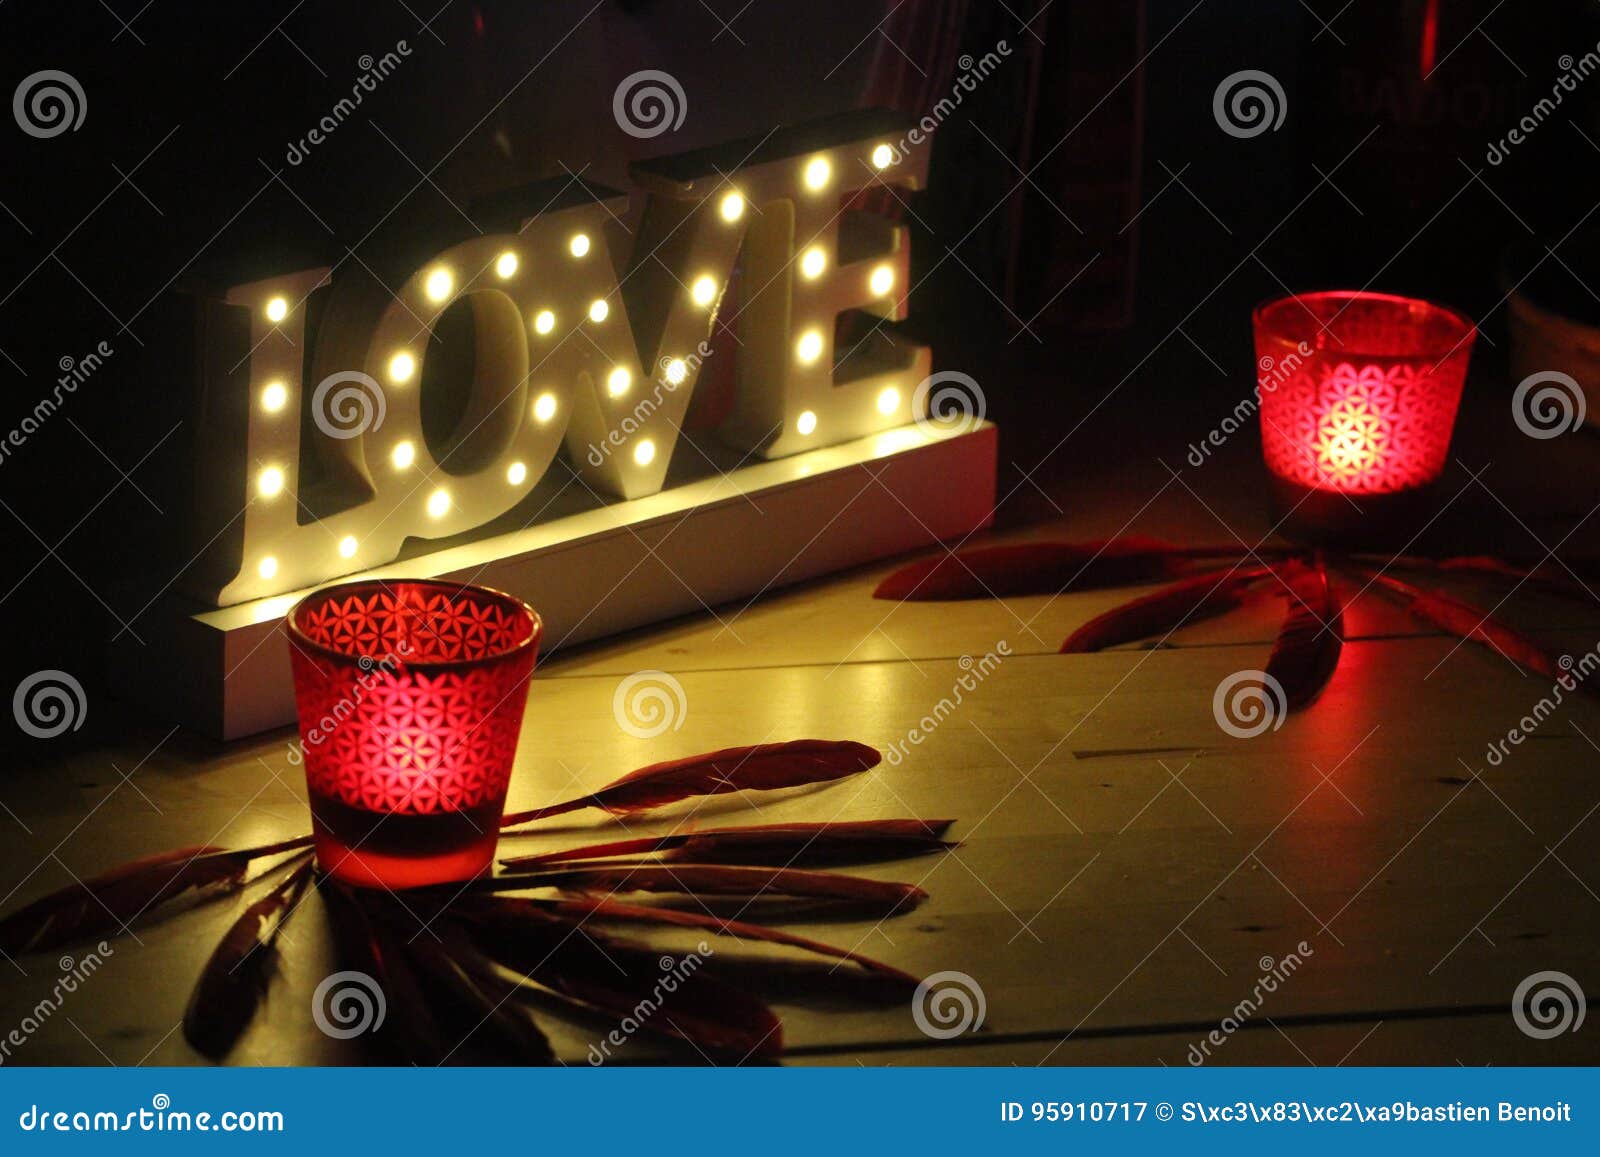 romantic image with candles and the word love bright